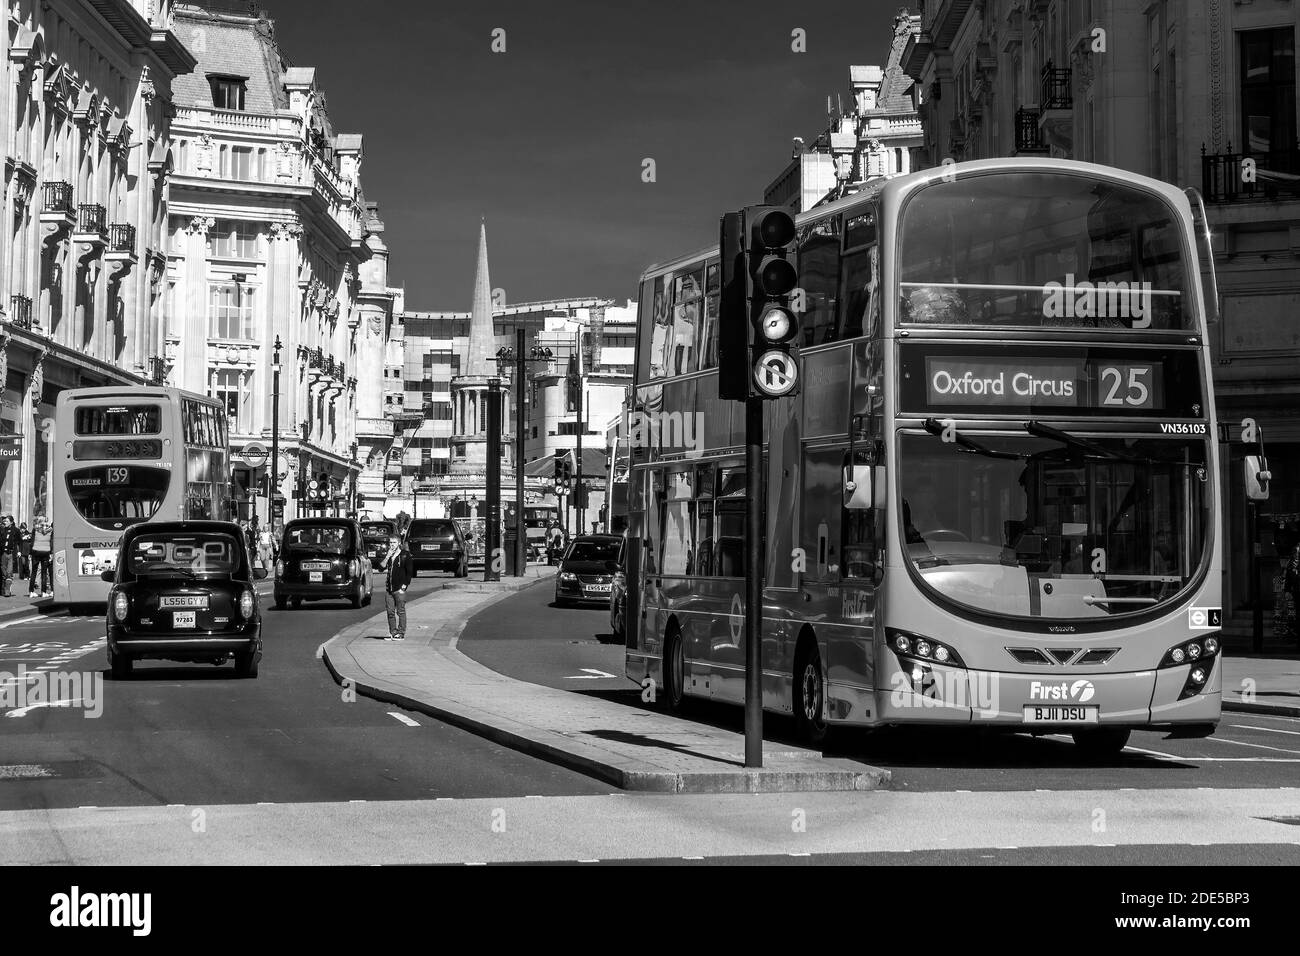 London, UK, April 1, 2012 : New modern Routemaster double decker red bus in New Oxford Street which is part of the cities public transport infrastruct Stock Photo